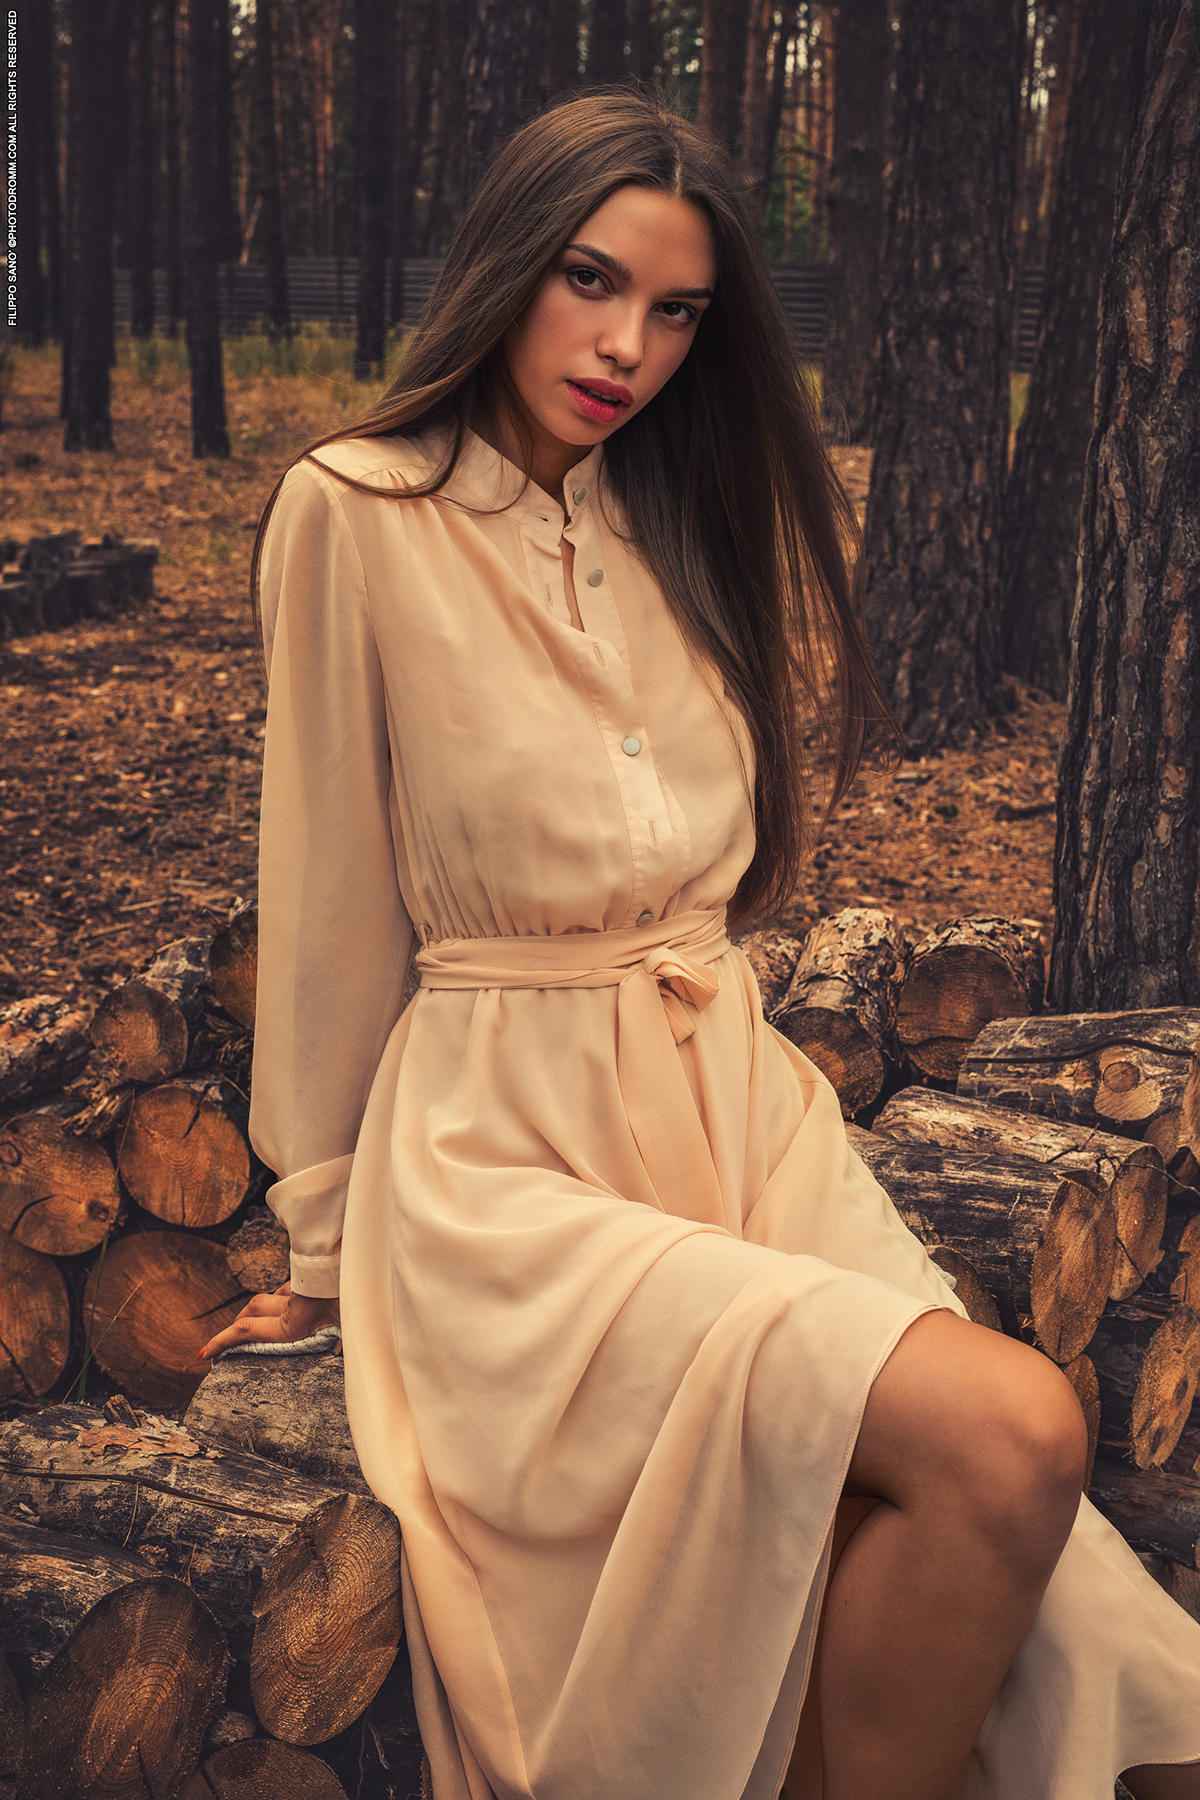 'In The Woods' with Alina via Photodromm - Pic #20